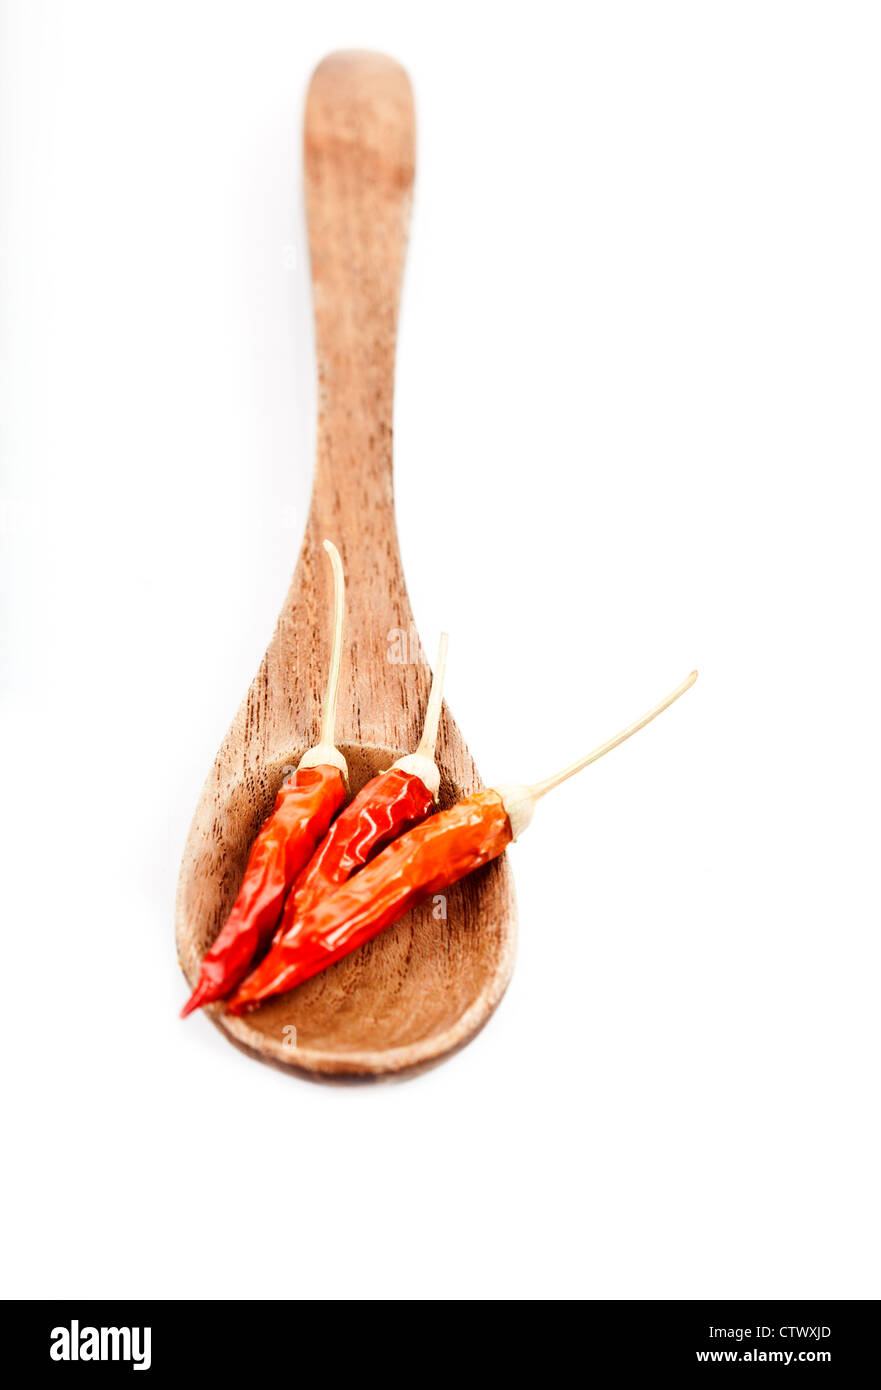 Wooden spoon with red peppers Stock Photo